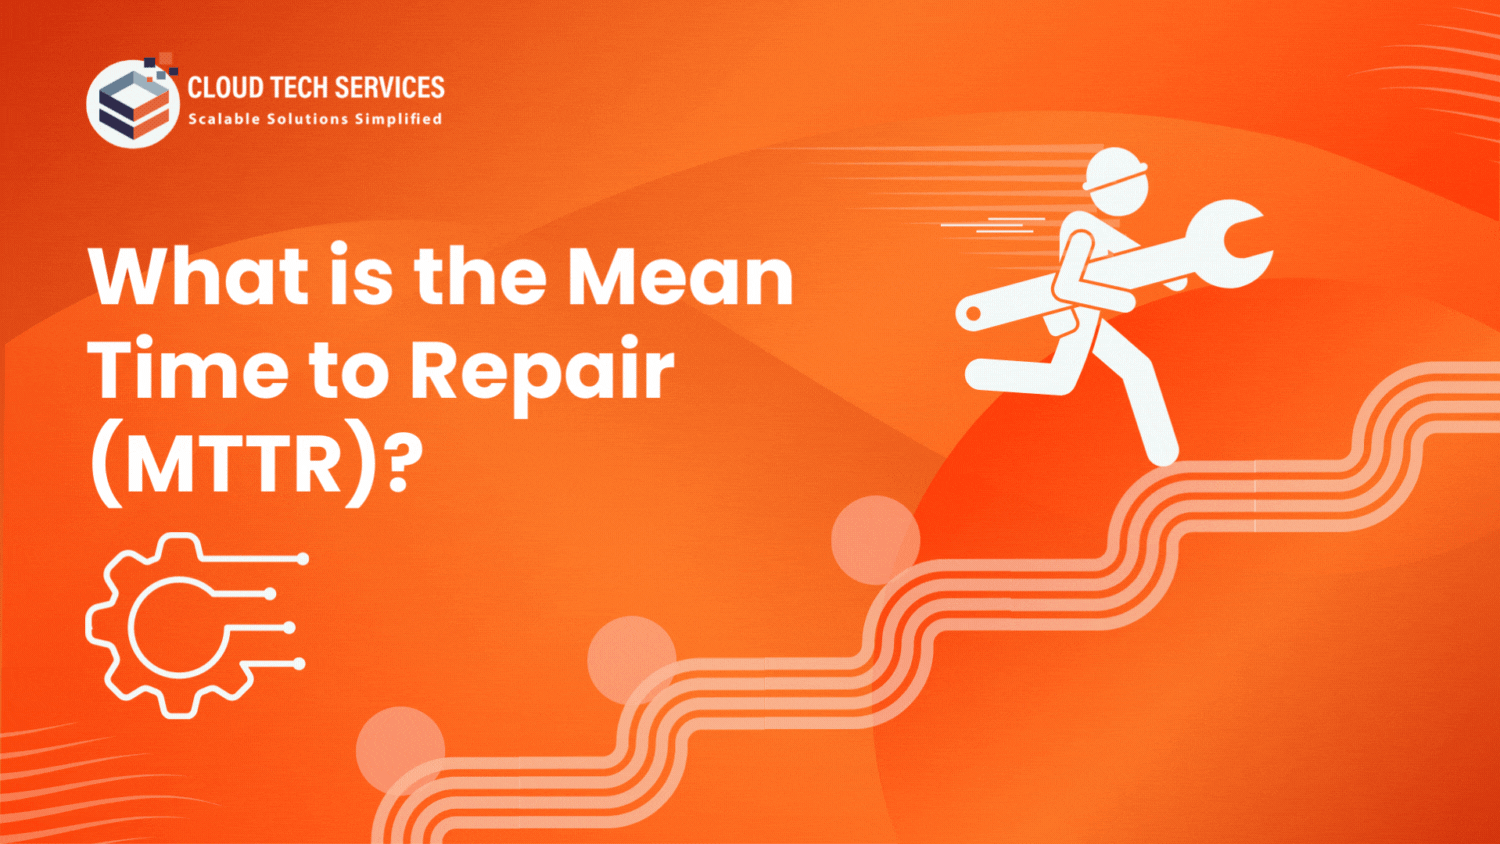 What is the Mean Time to Repair (MTTR)